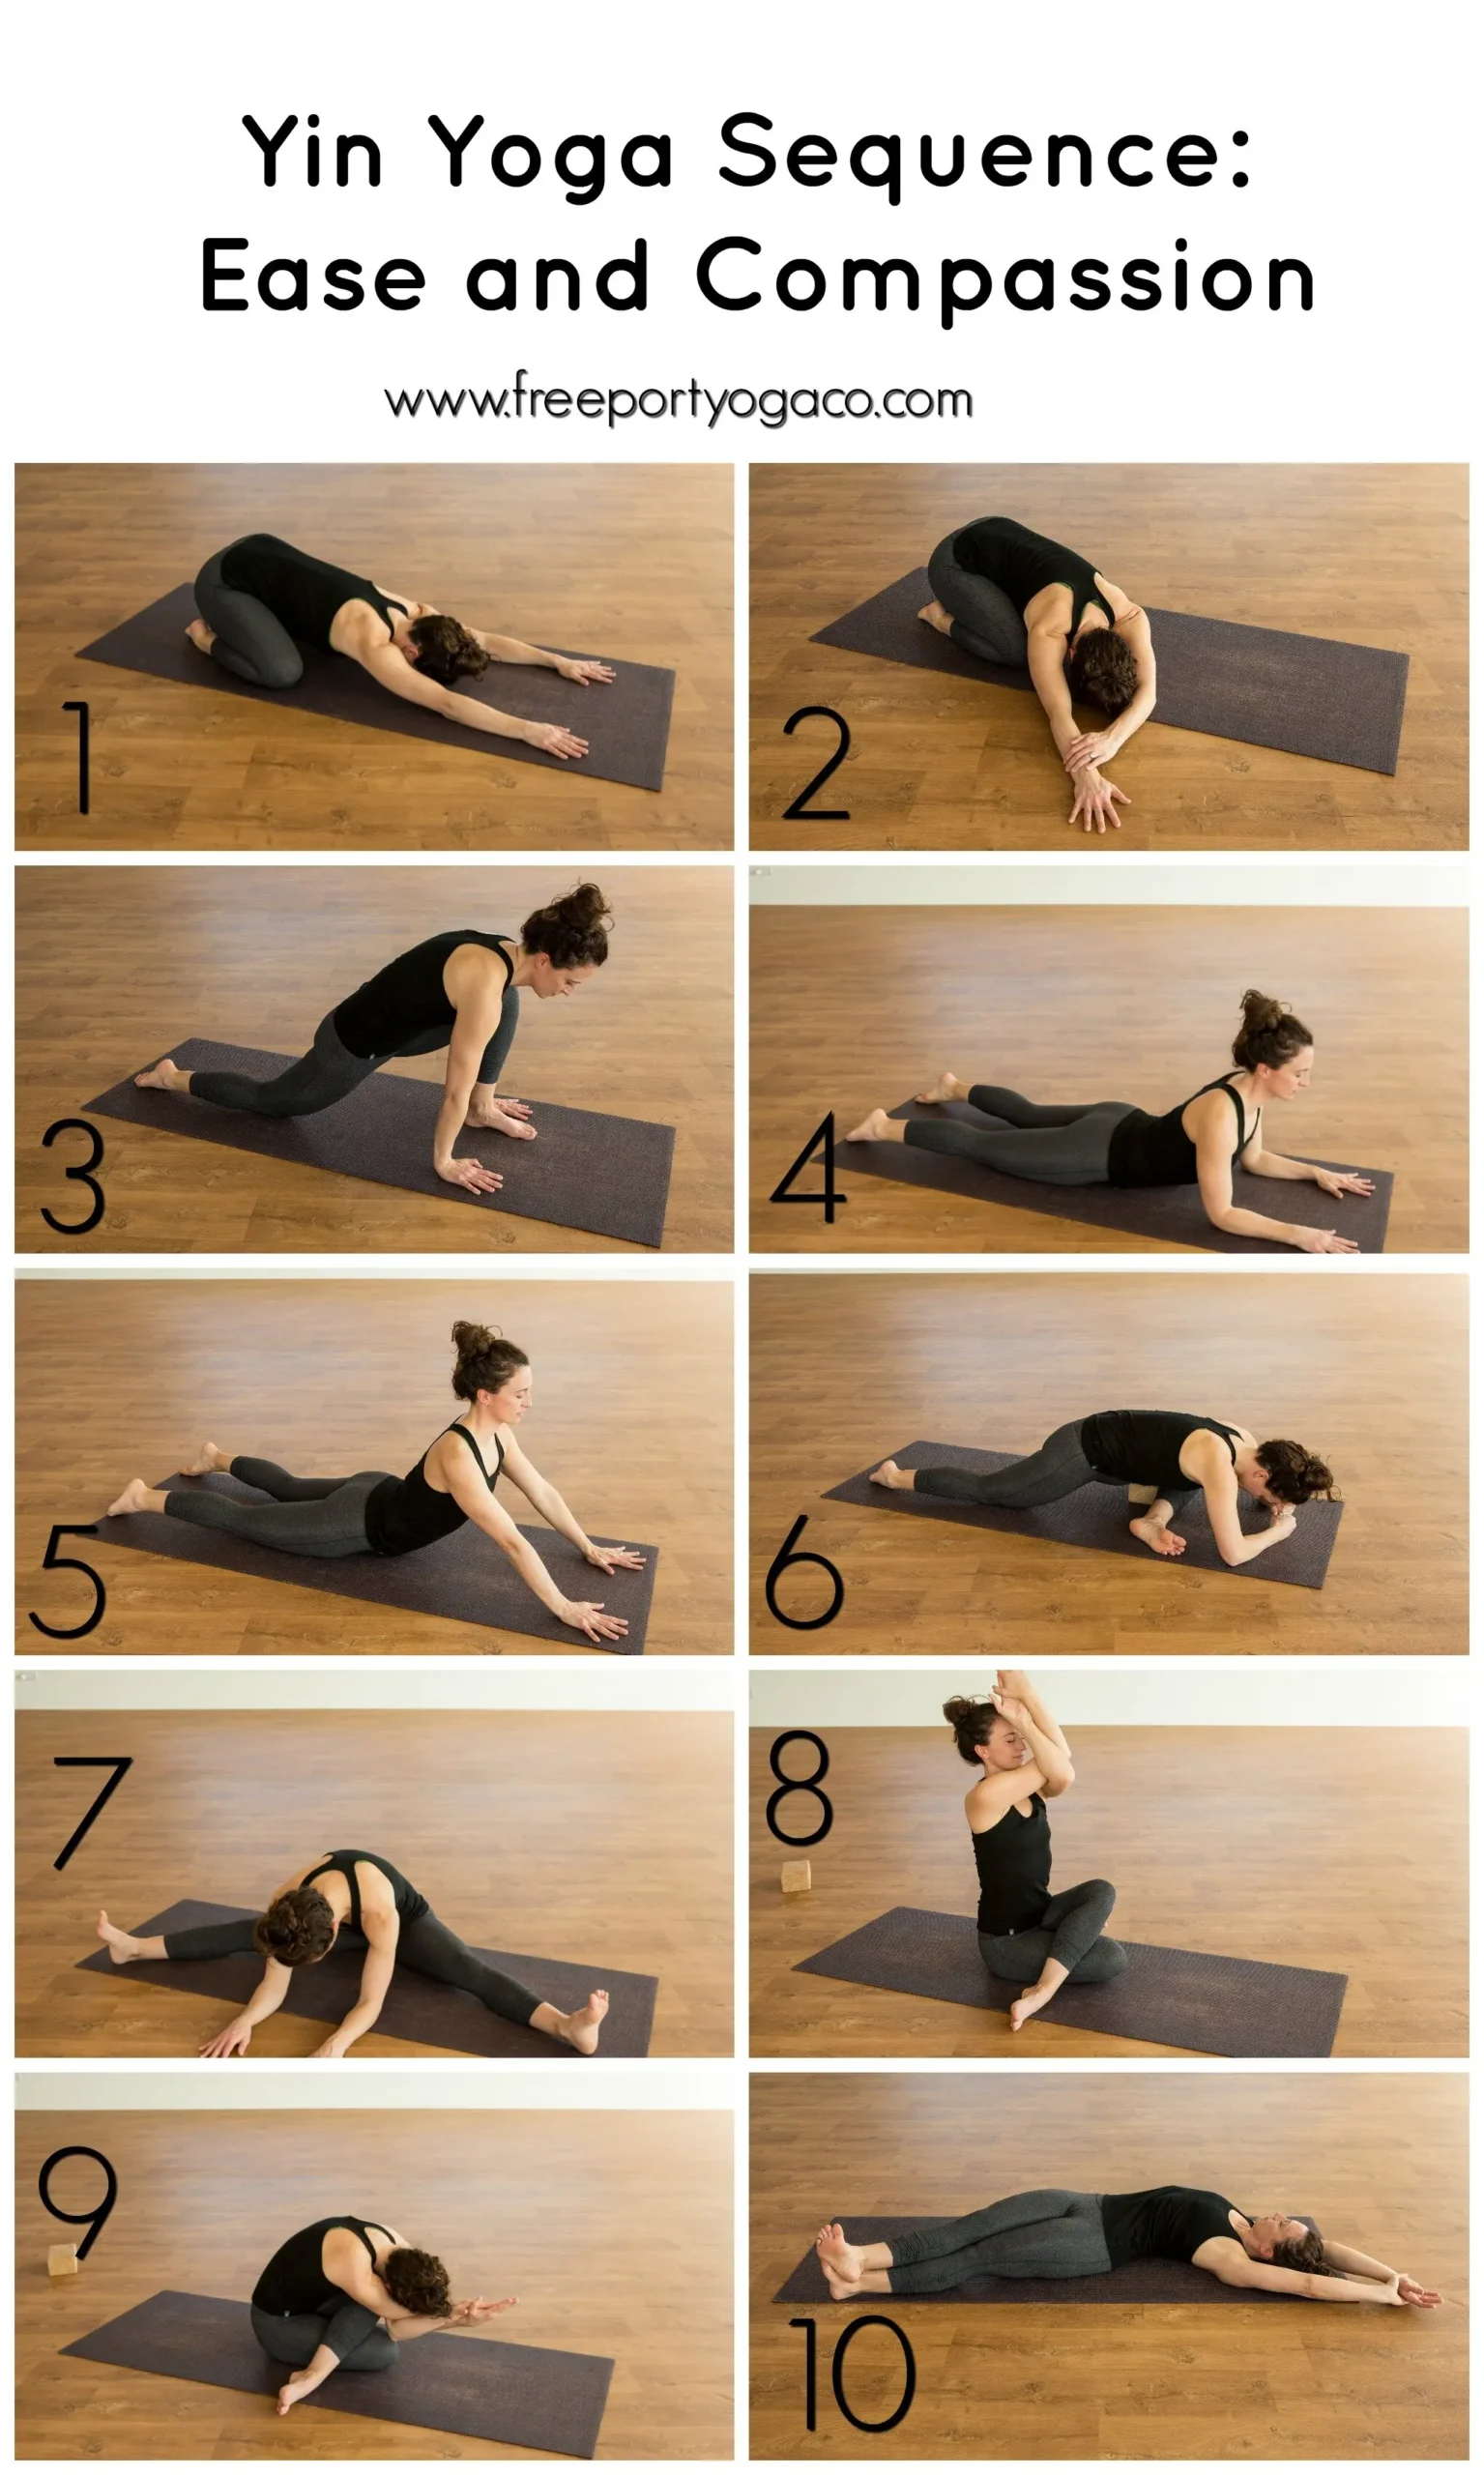 principles of yin yoga - What are the four principles of yin